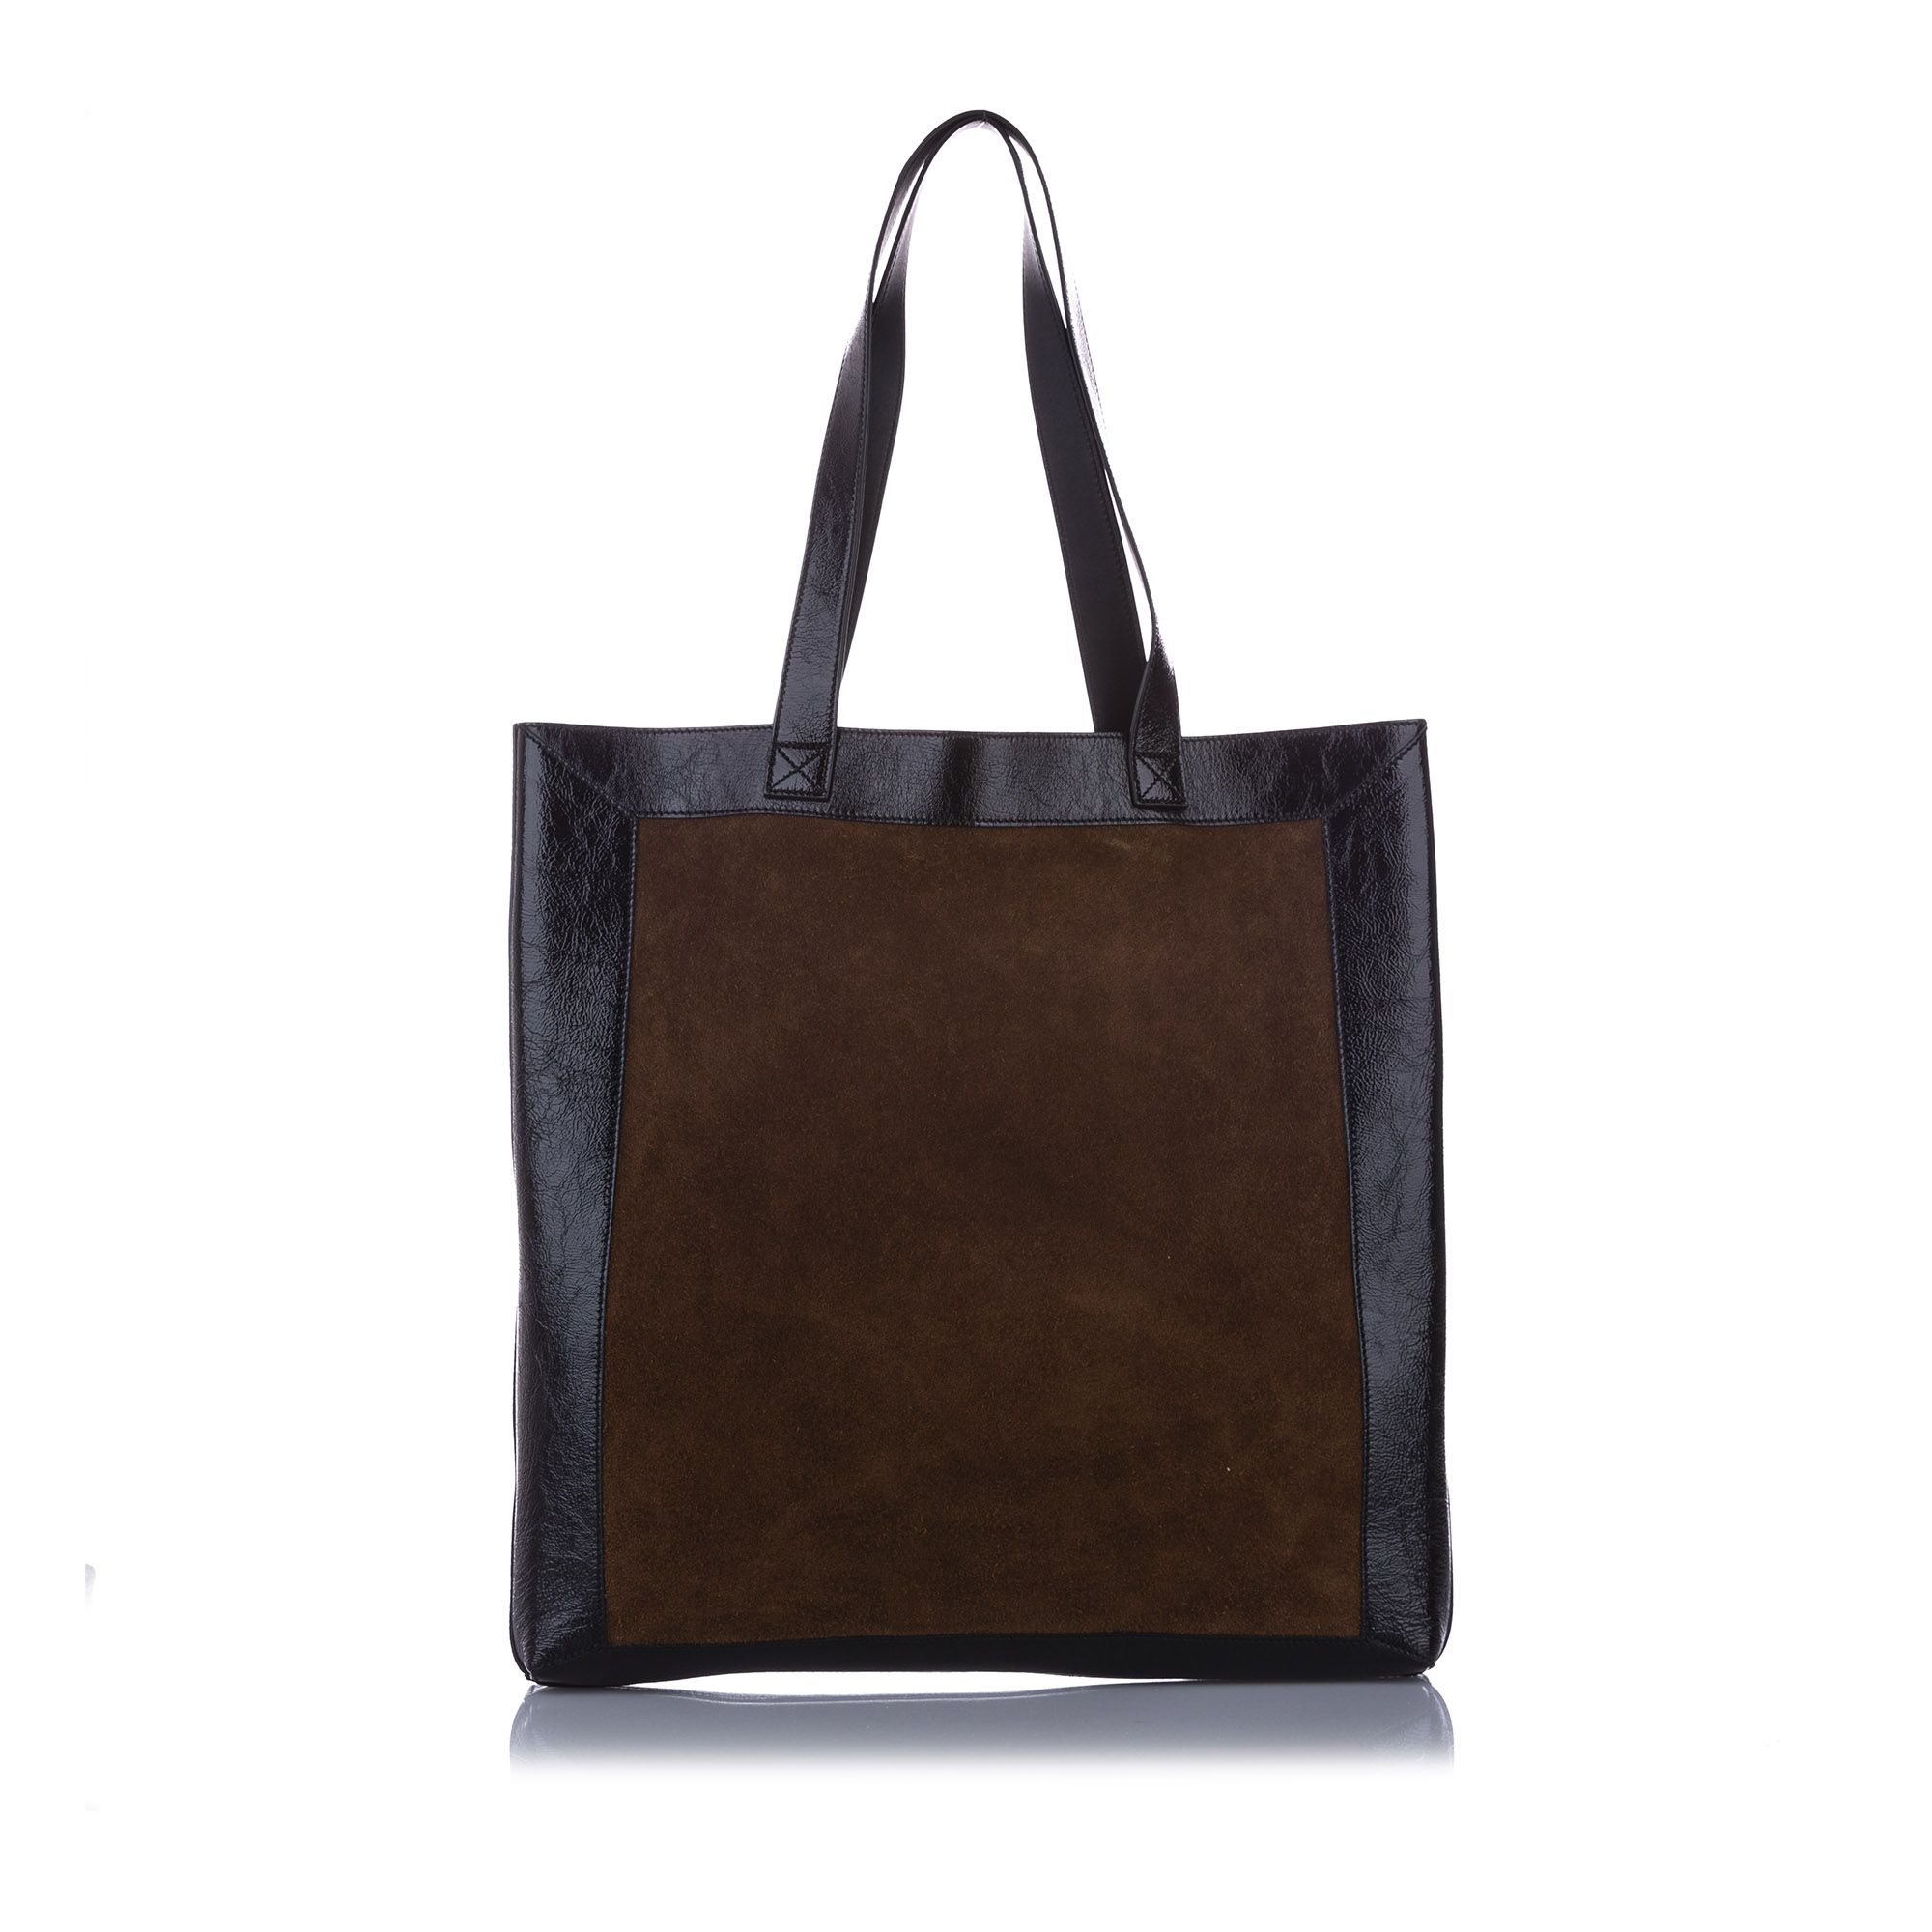 VINTAGE. RRP AS NEW. The Ophidia tote bag features a suede leather body, a flat leather straps and an open top.Interior lining is scratched.

Dimensions:
Length 42cm
Width 41cm
Depth 5cm
Hand Drop 27cm

Original Accessories: Pouch, Dust Bag

Serial Number: 519335 525040
Color: Brown x Dark Brown x Black
Material: Leather x Suede x Leather x Patent Leather
Country of Origin: ITALY
Boutique Reference: SSU83789K1342


Product Rating: GoodCondition